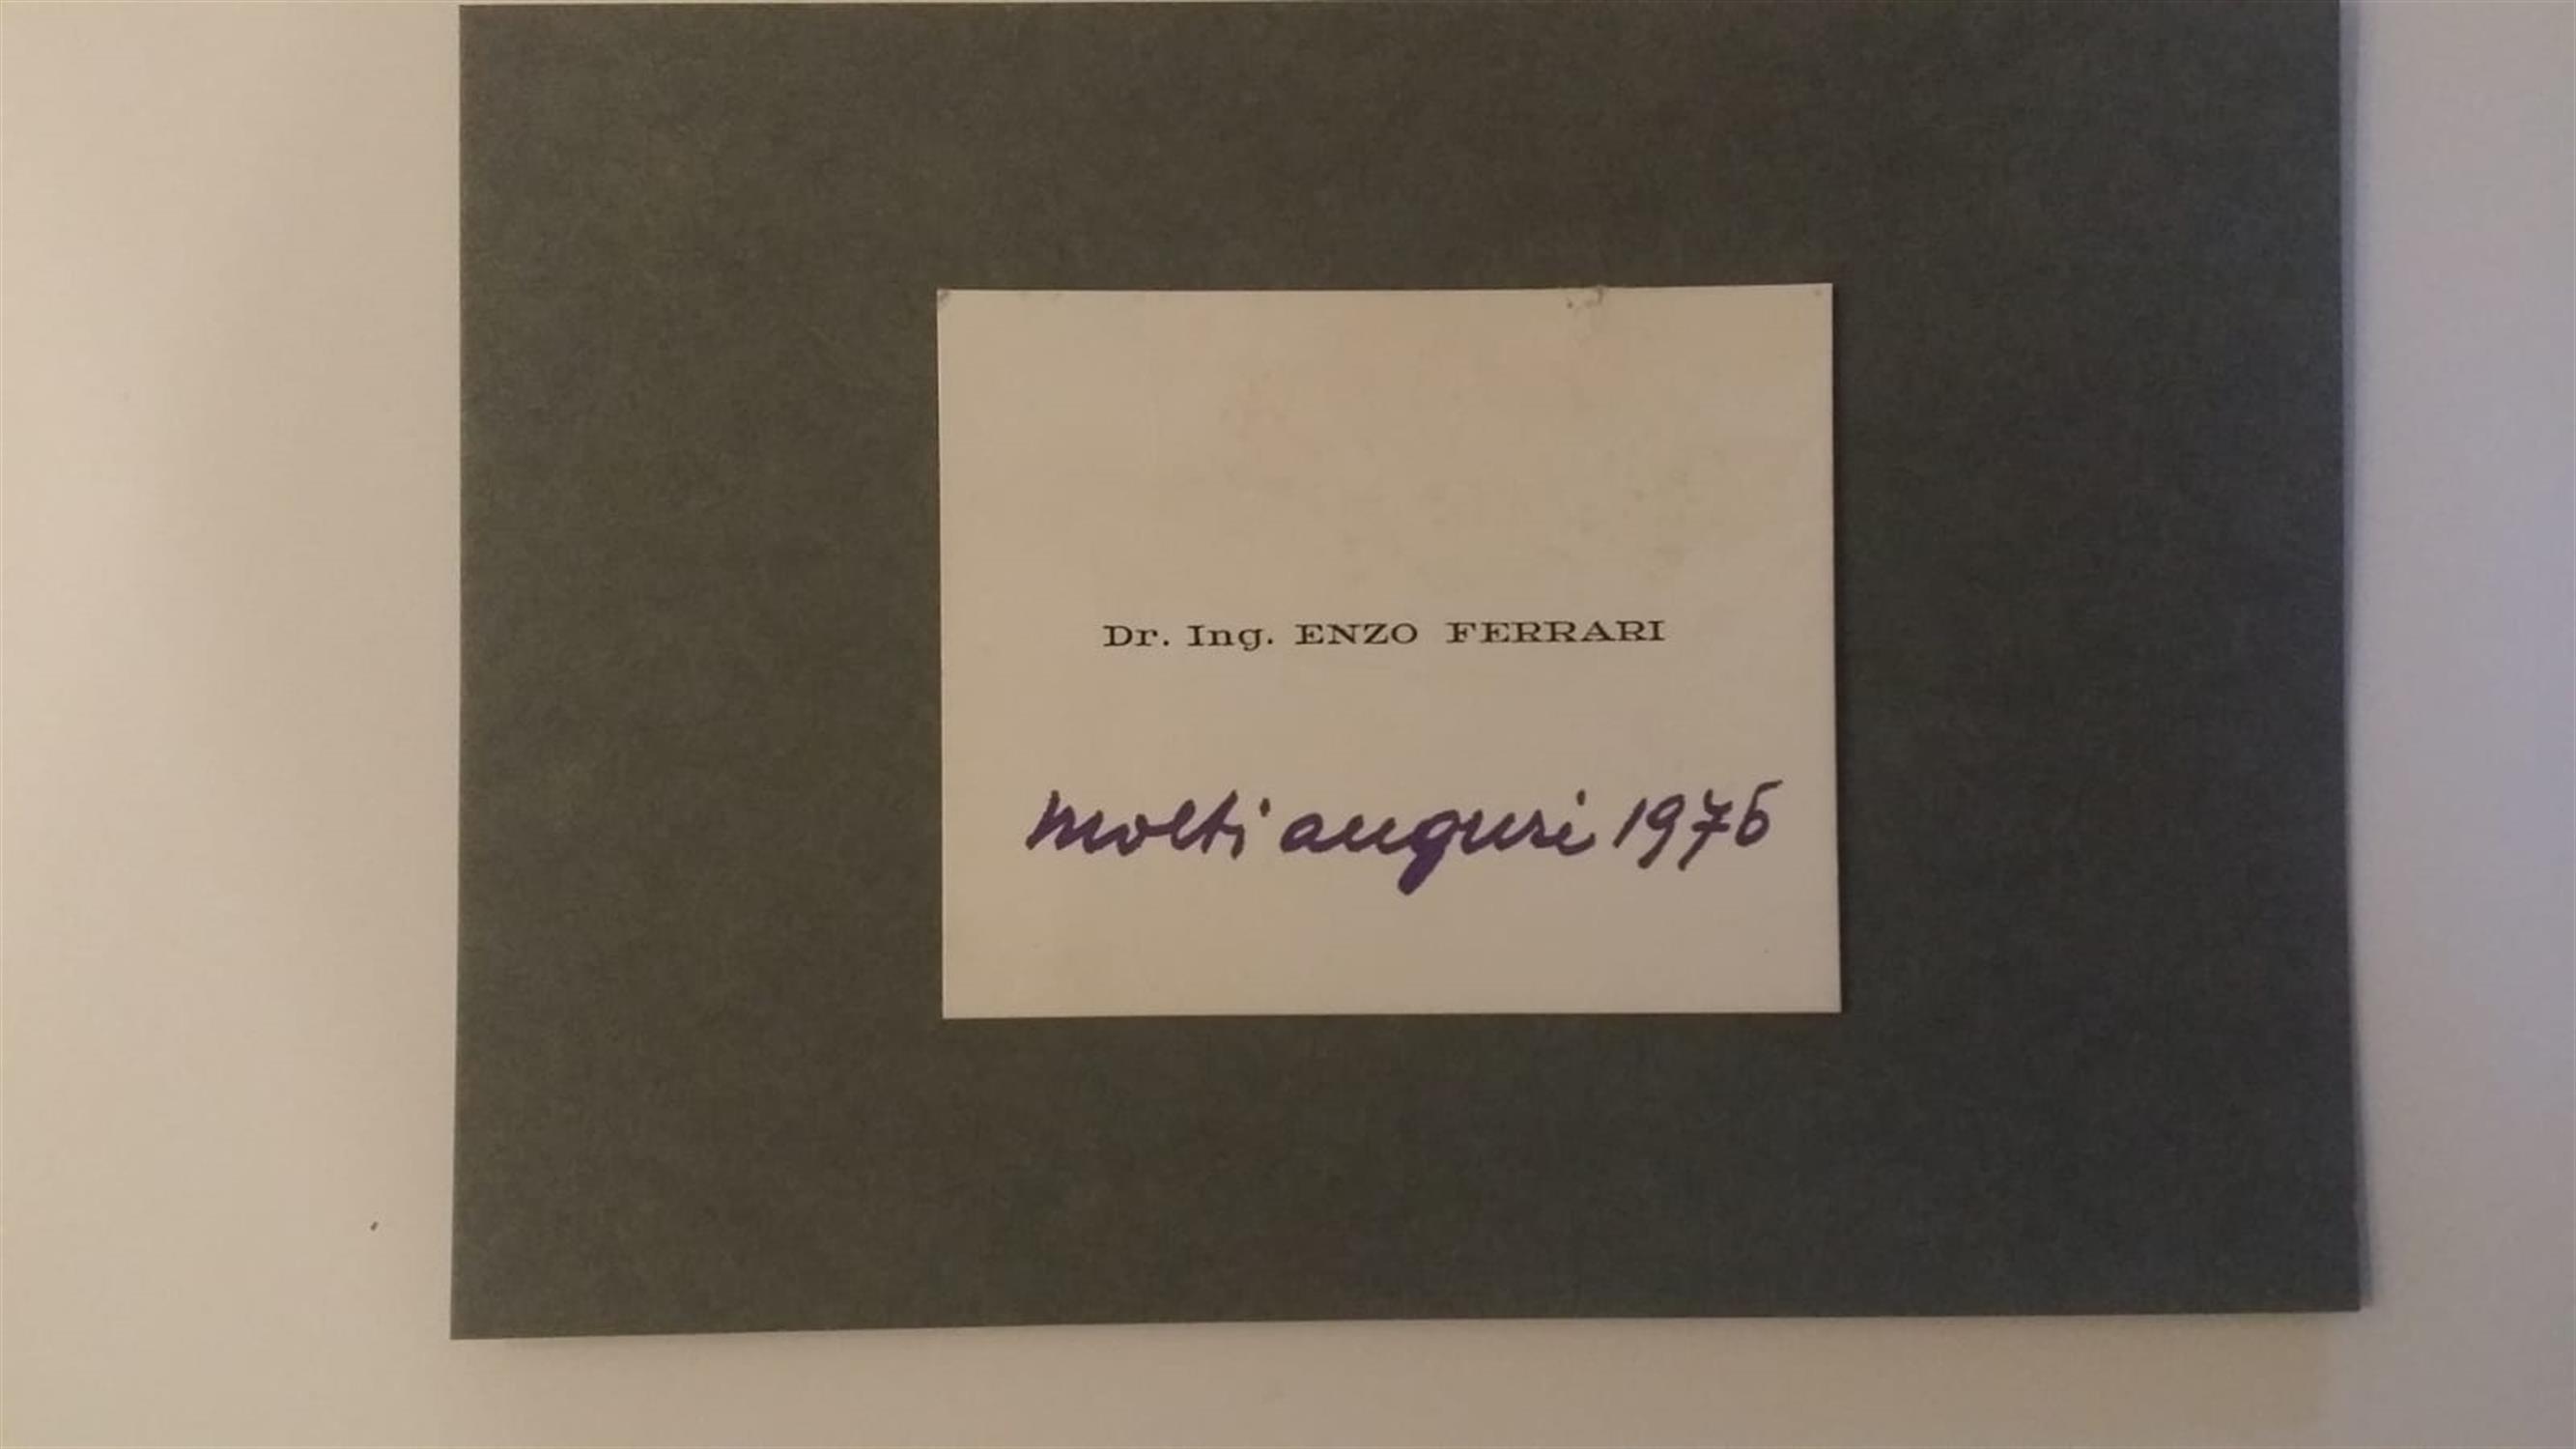 1976 Ferrari Mondiale Official Yearbook with Enzo Ferrari-Signed Business Card - Image 2 of 3